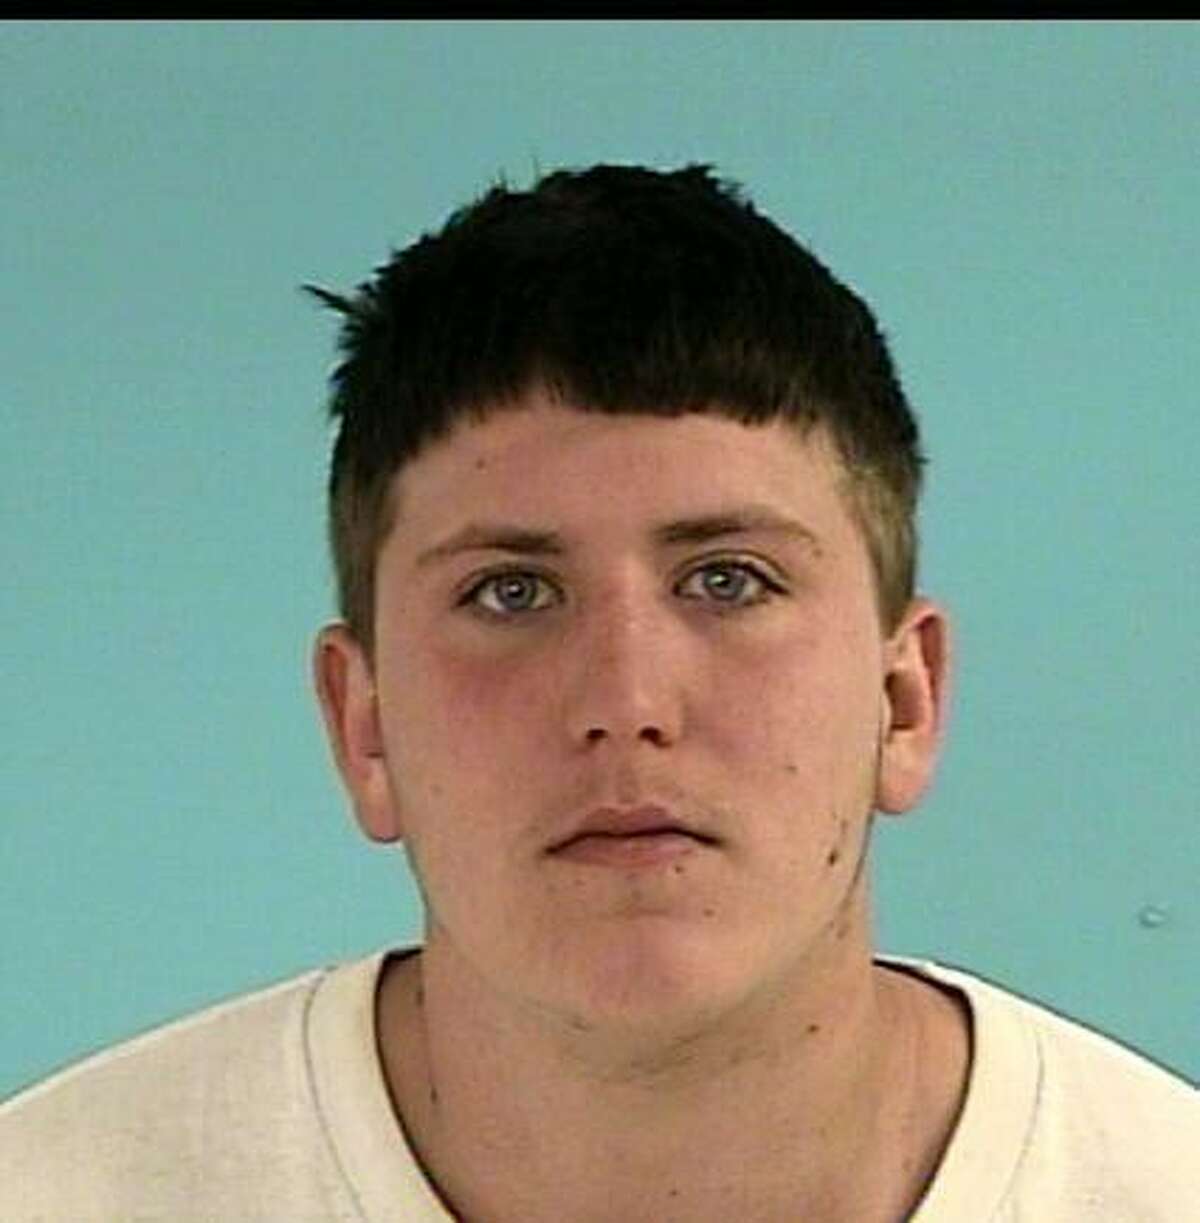 CADA, Nathan AndrewWhite/Male DOB: 03/21/1992Height: 5’08’’ Weight: 180 lbs.Hair: Brown Eyes: HazelWarrant: # 090706442 Order of Arrest Criminal Mischief LKA: Fawn Mist Dr., Conroe.